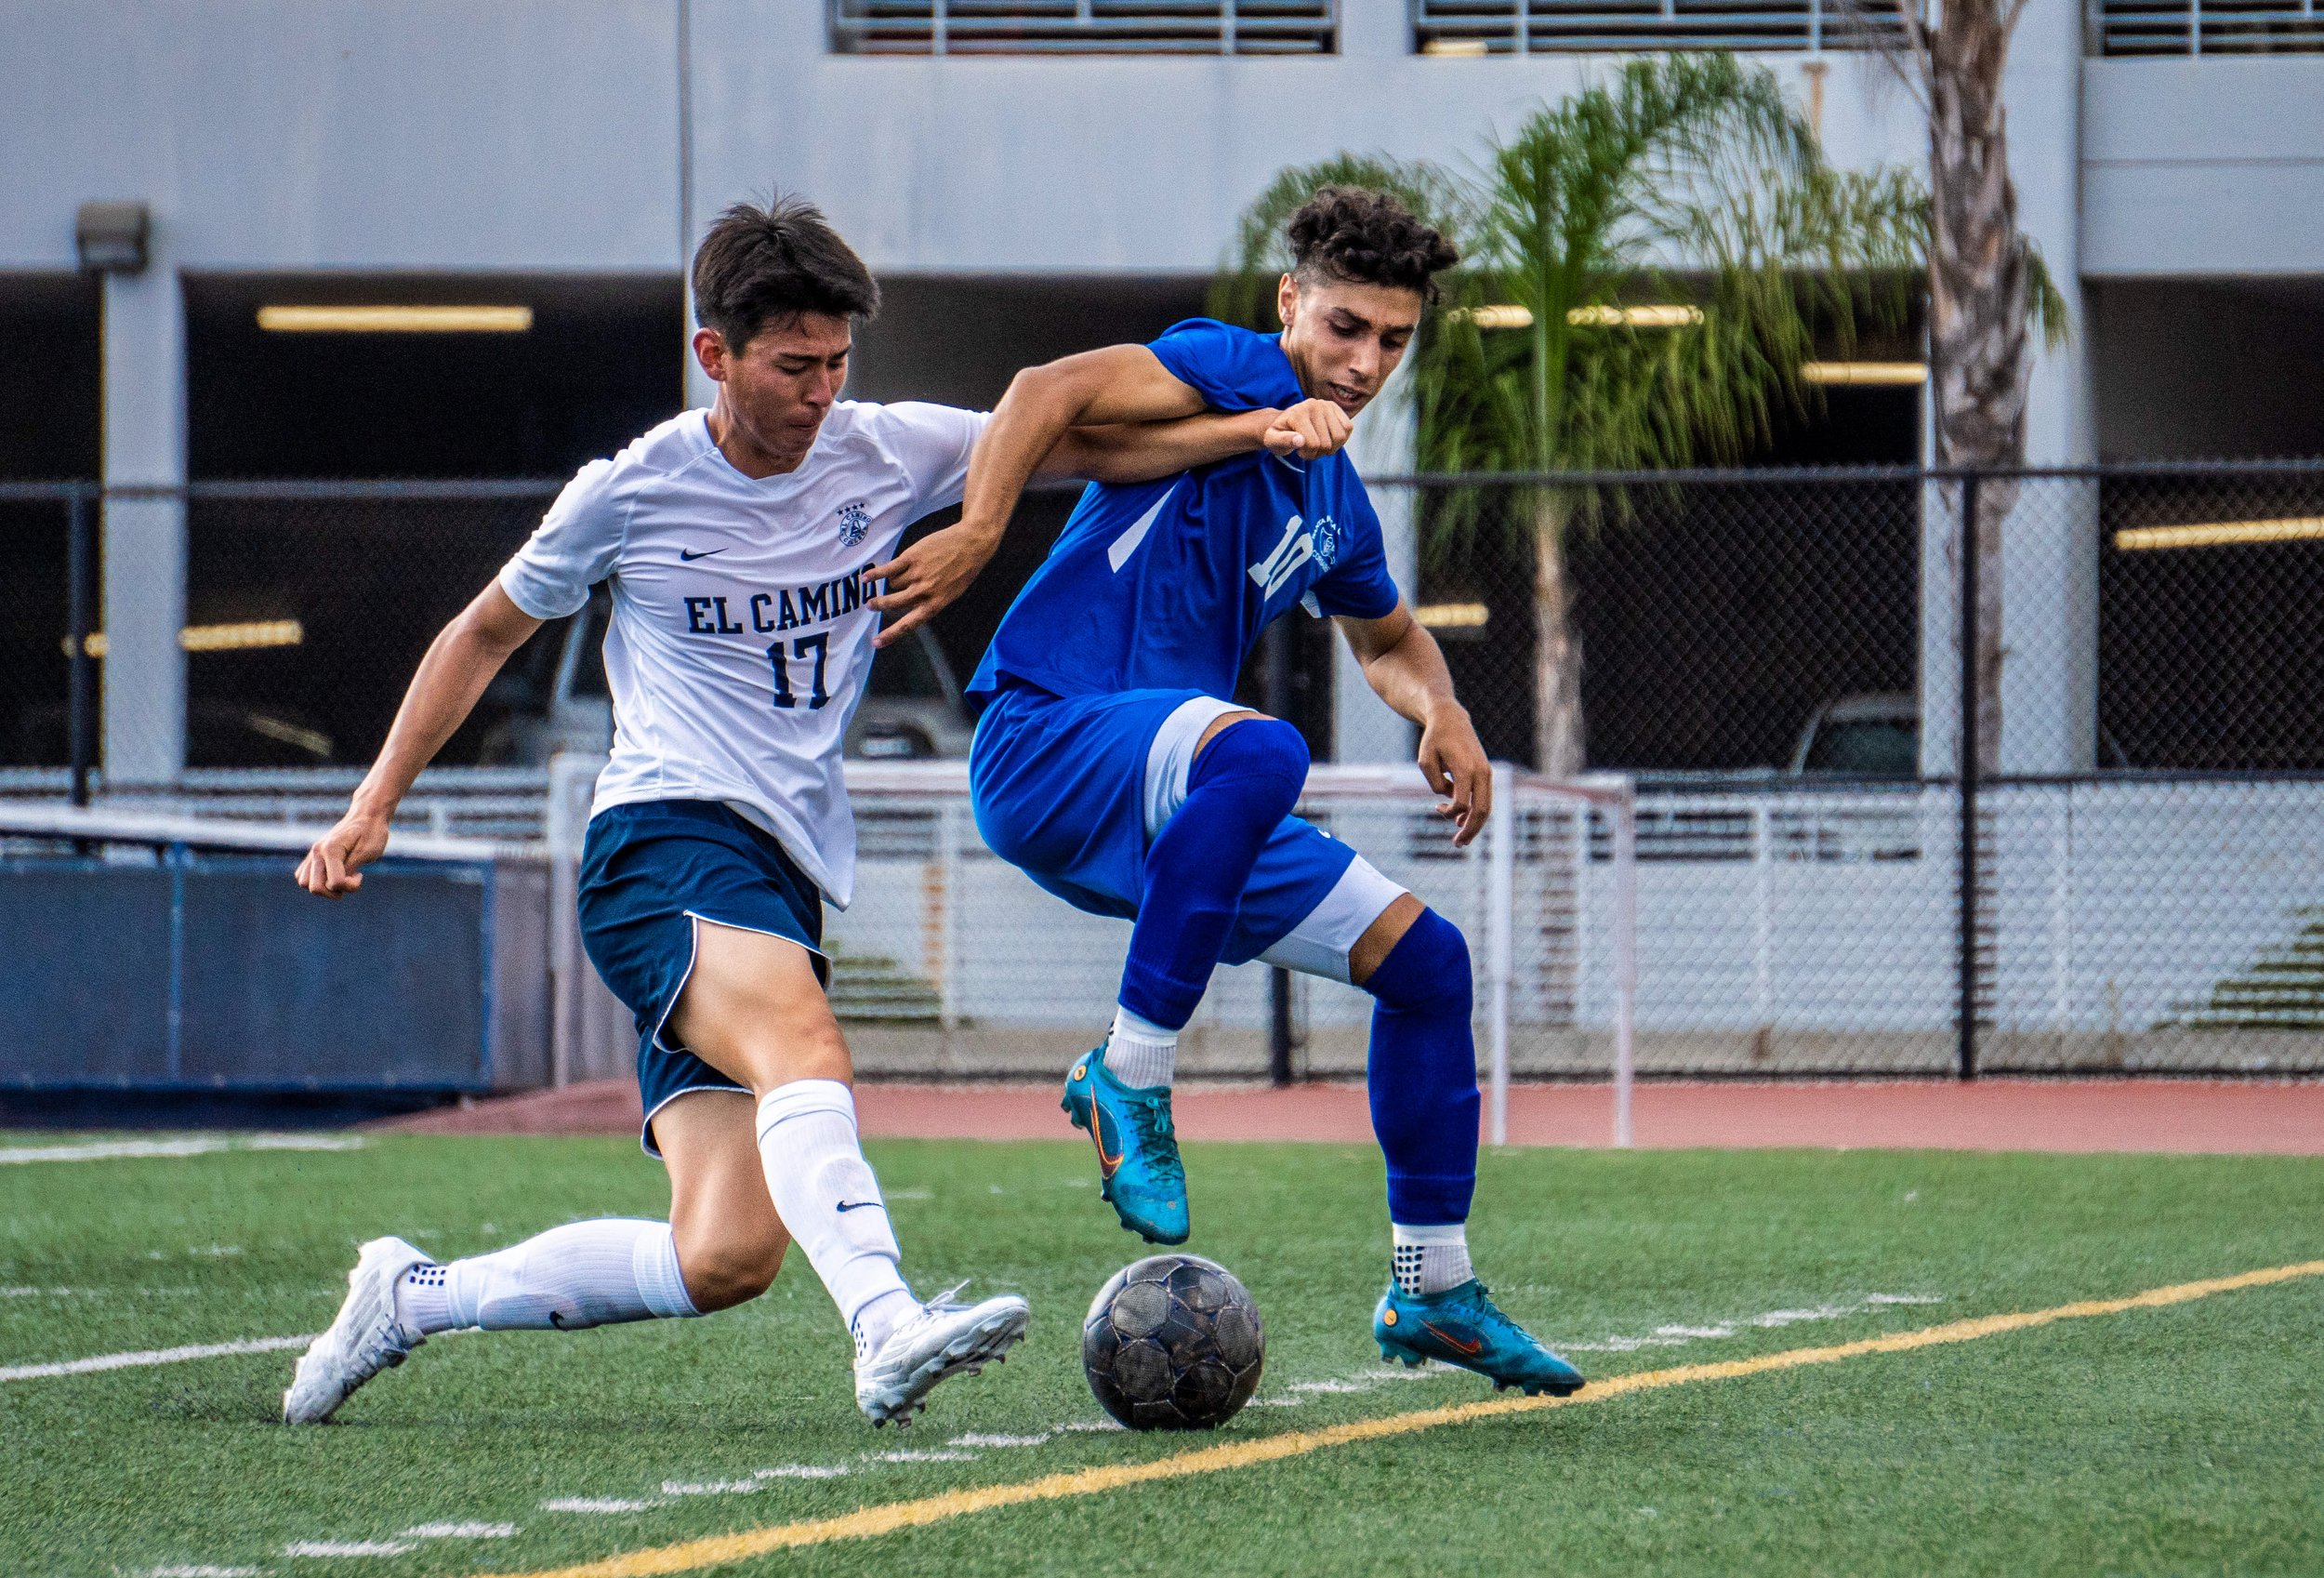  Arms entangled El Camino College Warrior Brian Park (17) and Santa Monica College Corsairs Roey Kivity (10) fight midair for the ball’s possession during the second half of the game. The Corsairs brought the game home, beating the Warriors 3 to 2. T